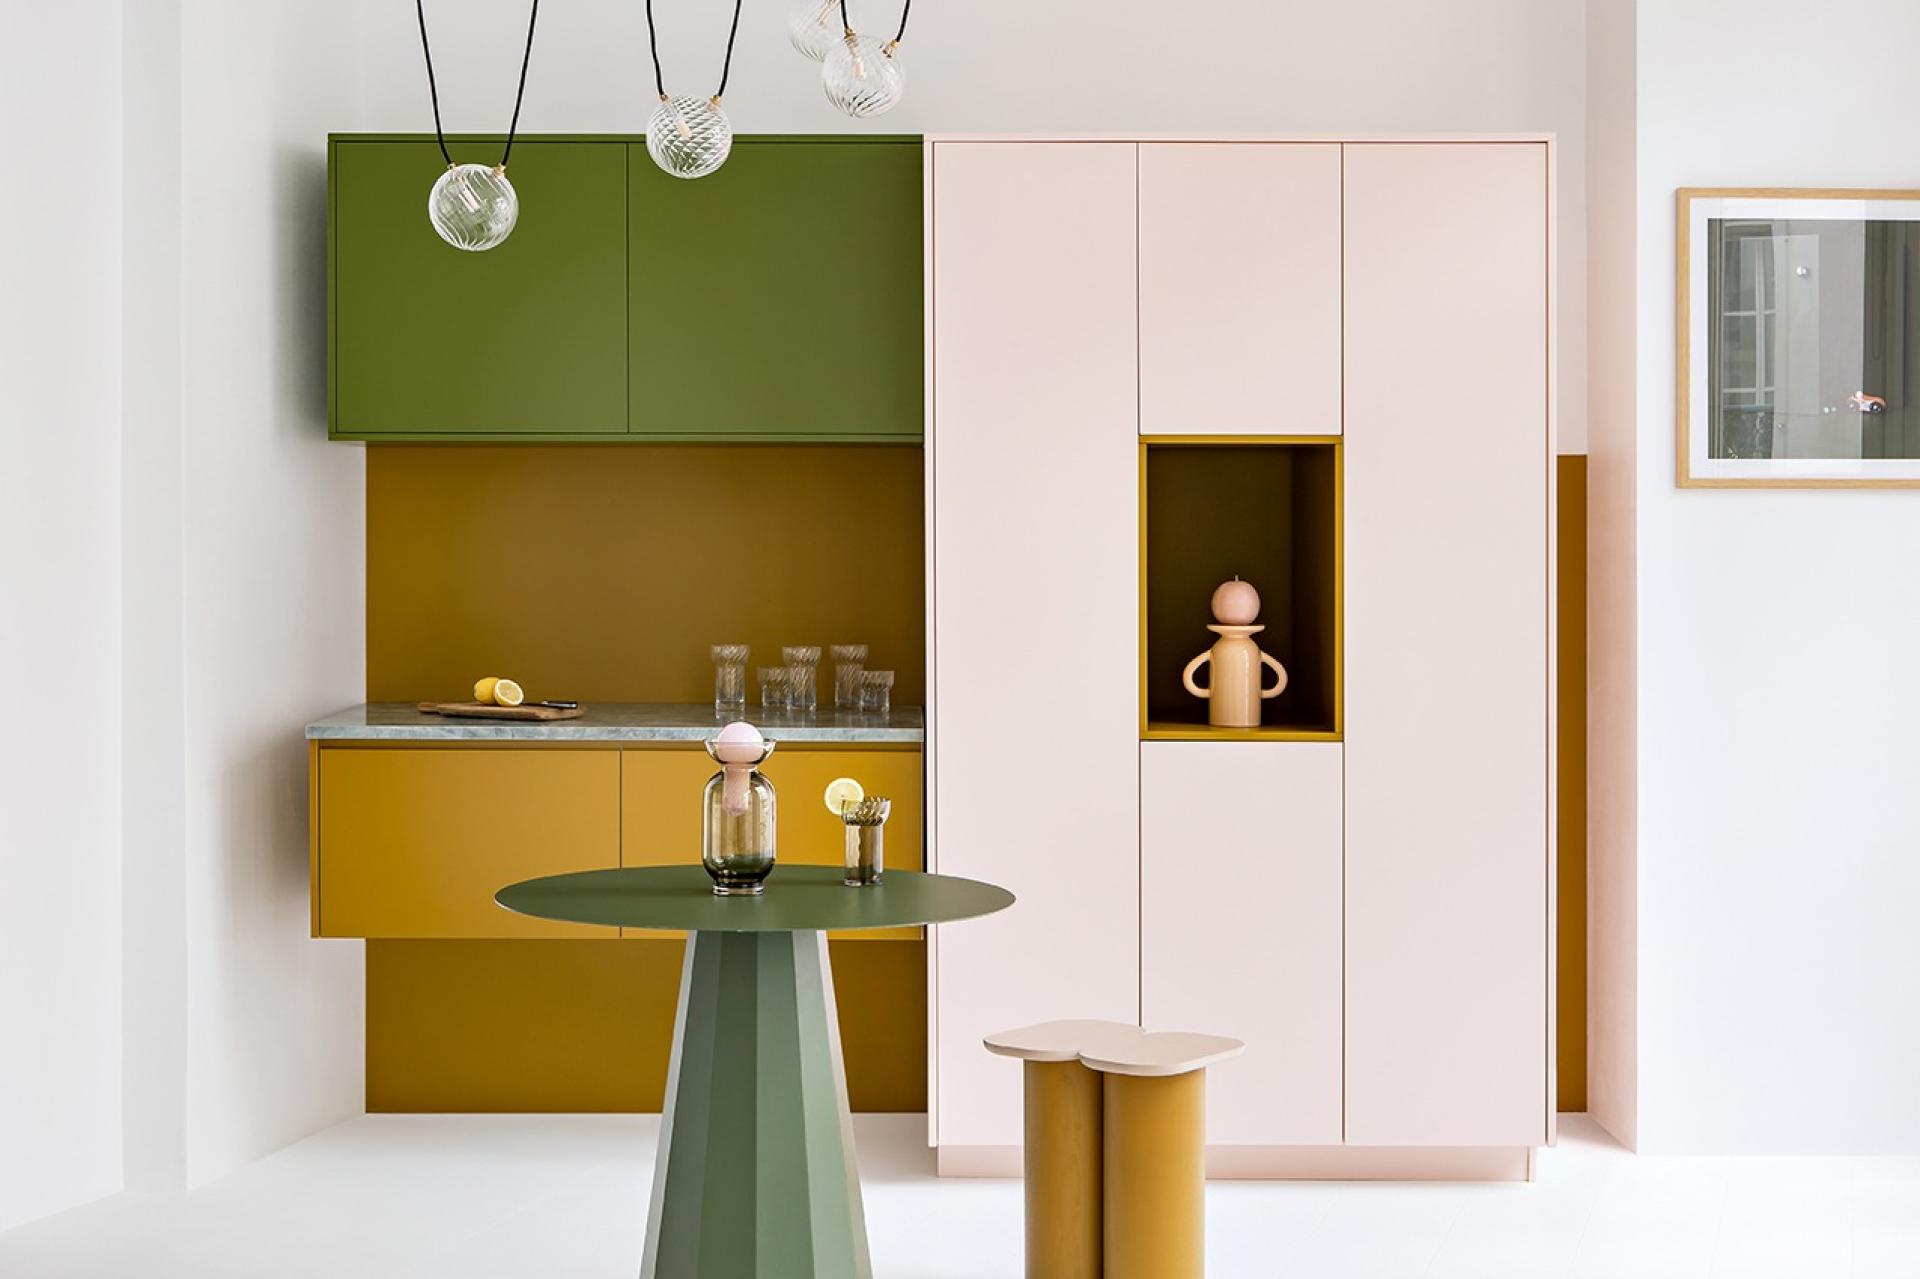 A kitchen in Ocre, Rose calcaire and Romarin by Margaux Keller